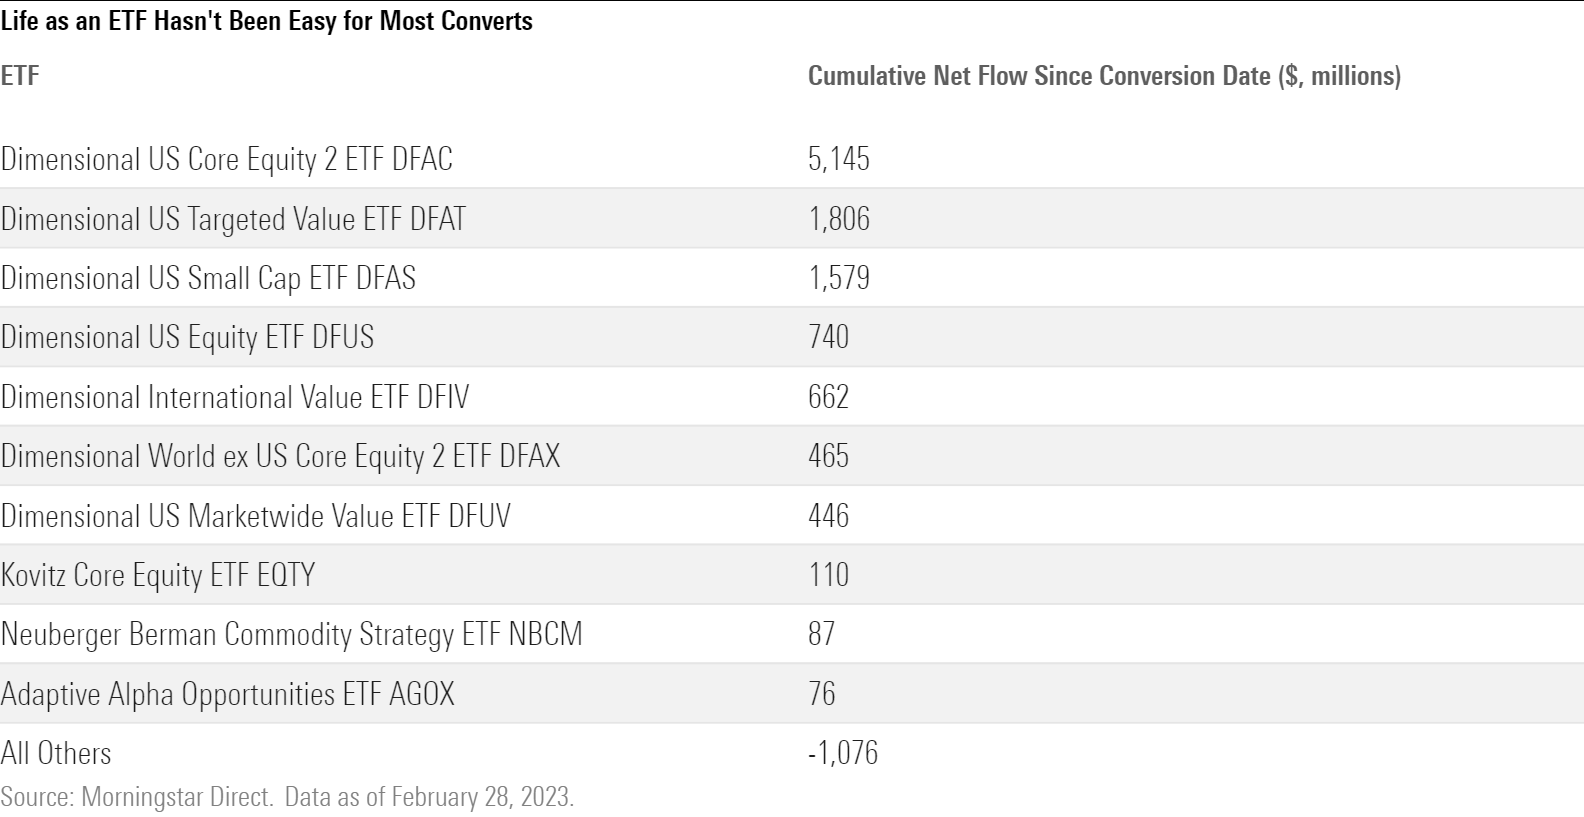 A table of funds' flows since converting to an ETF.